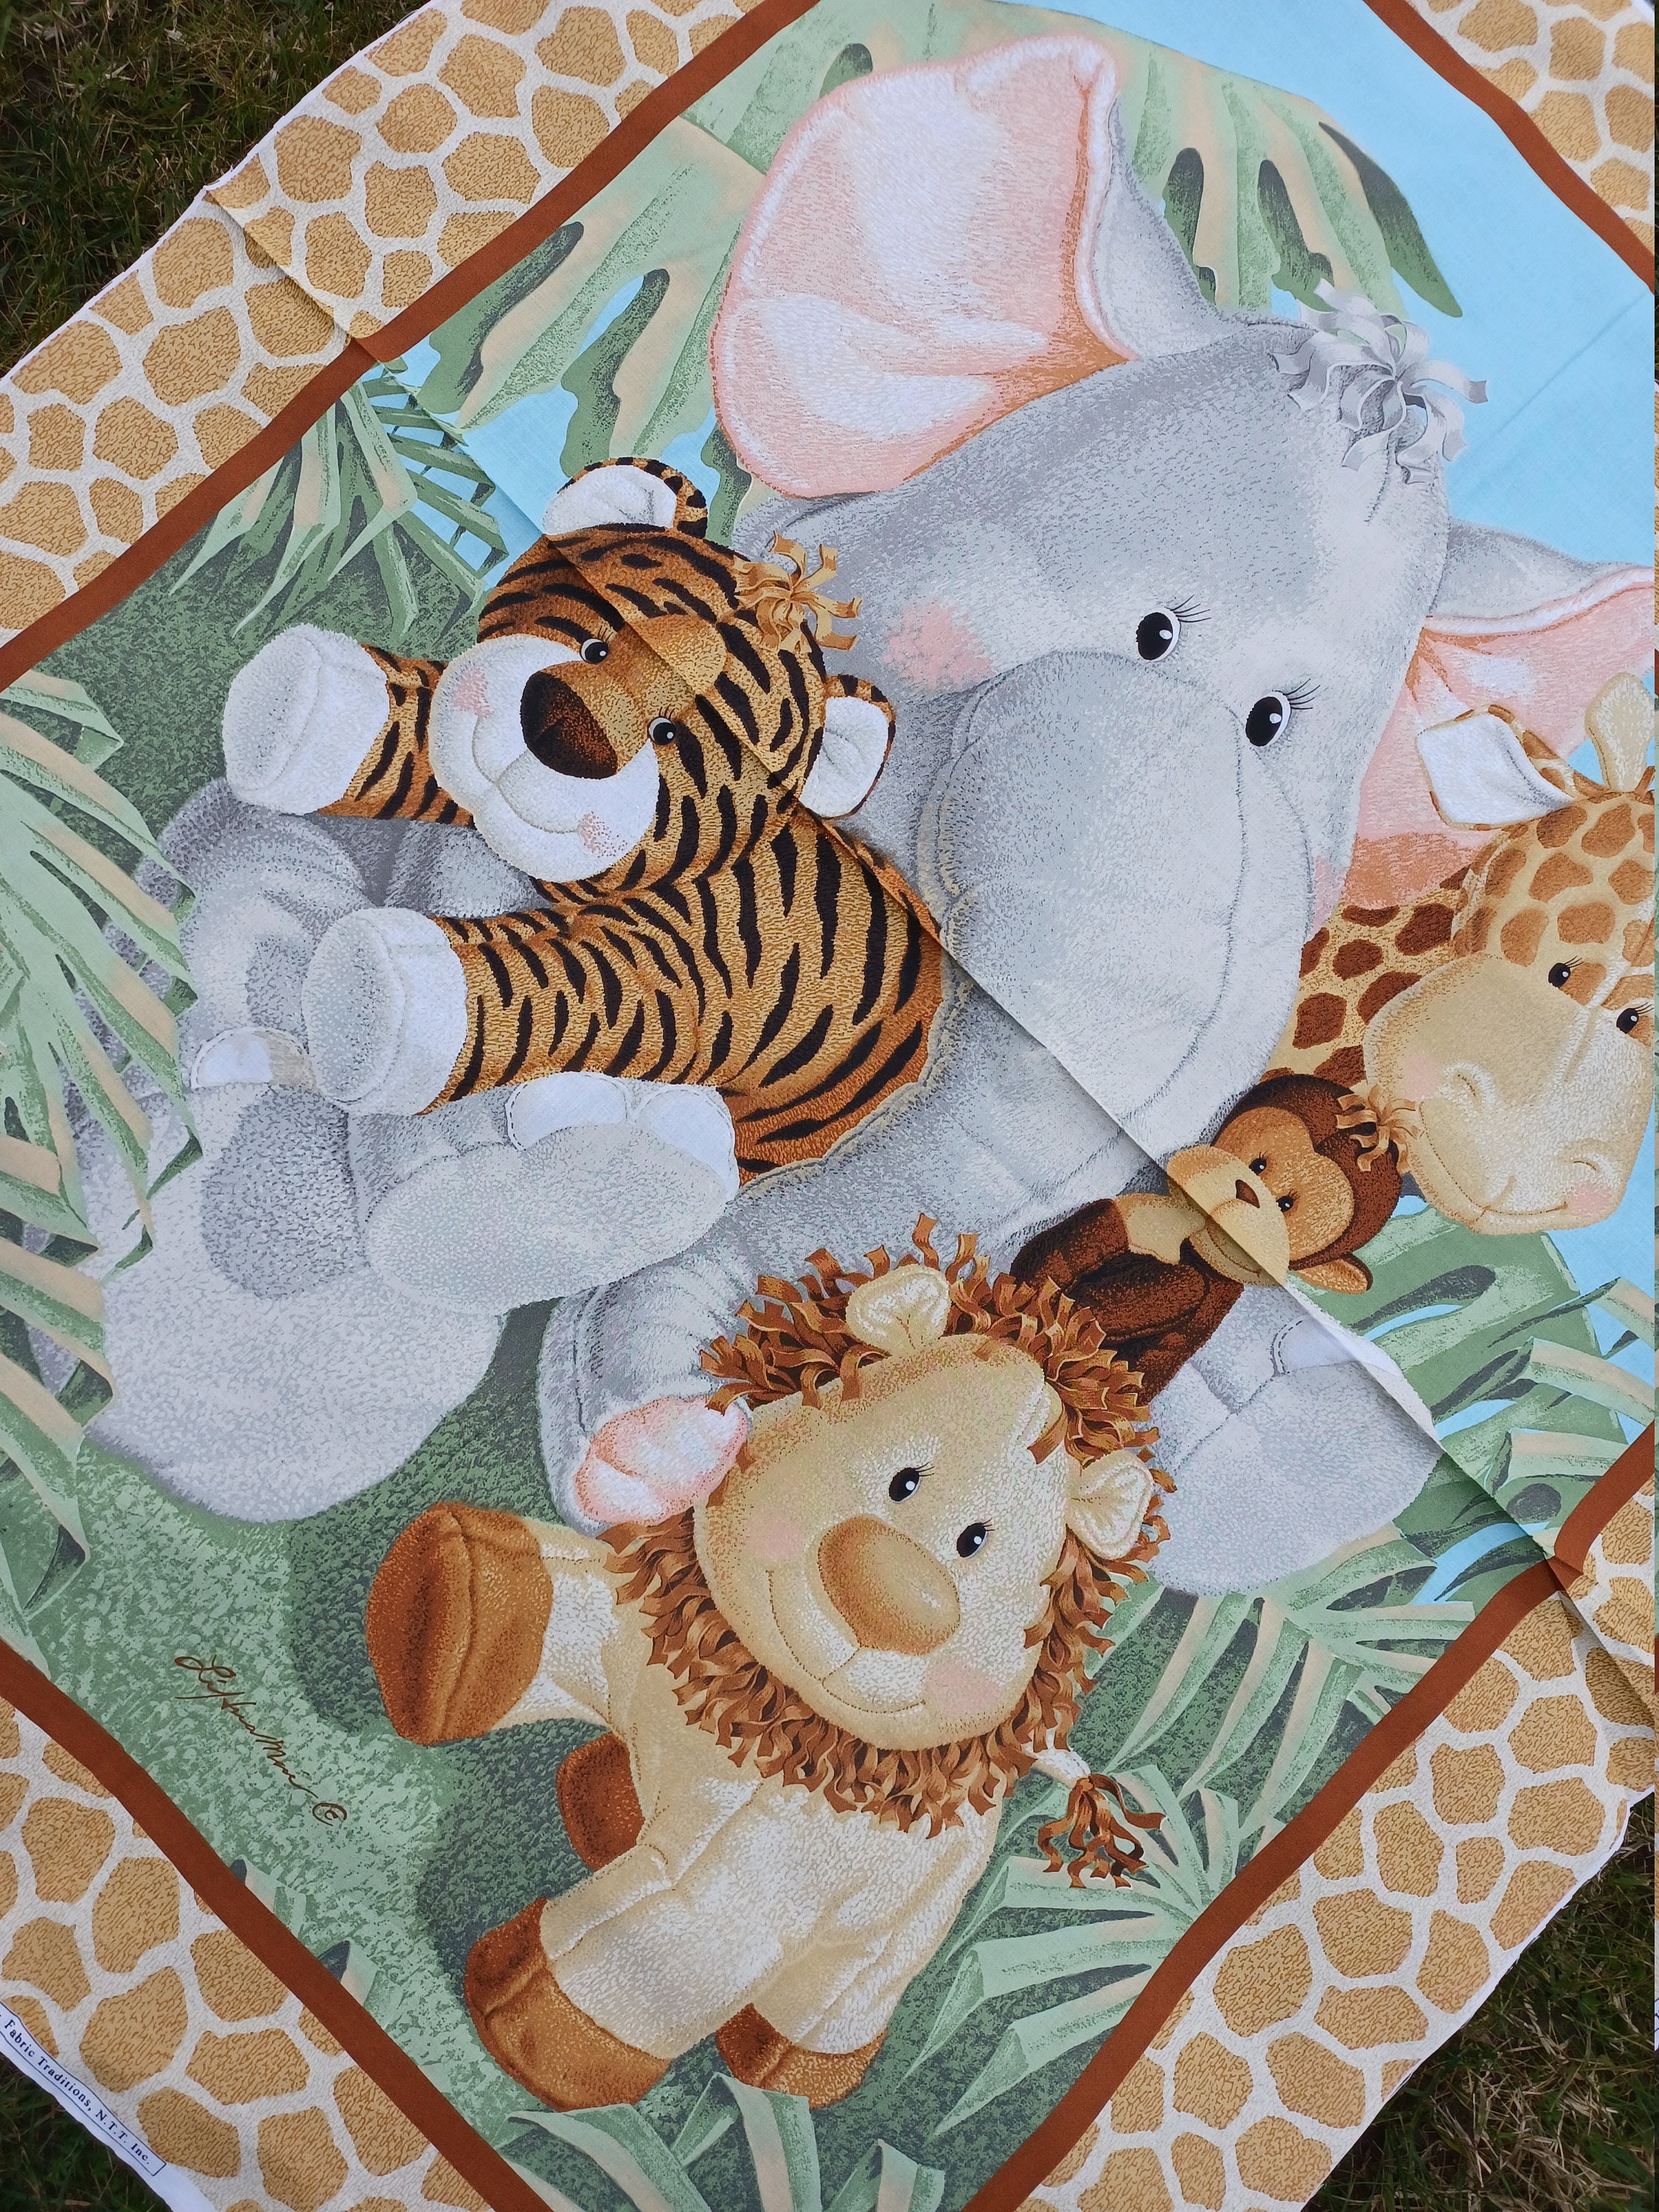 Jungle Babies Fabric Panel to Make a Baby Quilt 